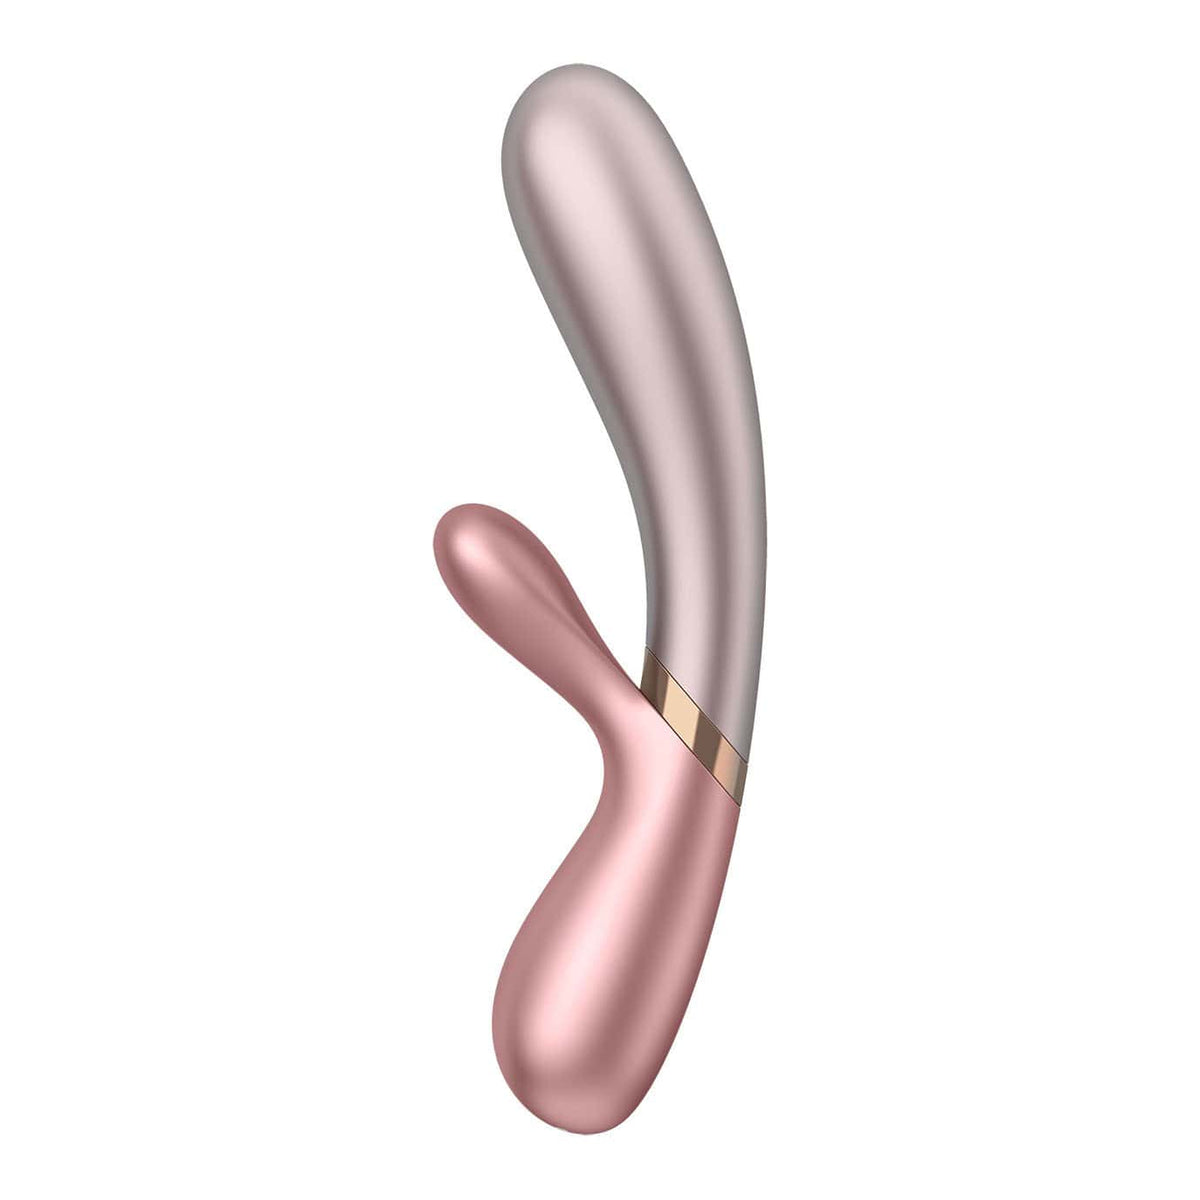 Satisfyer - Hot Lover Warming Rabbit Vibrator with Bluetooth and App (Pink/Dark Pink)    Rabbit Dildo (Vibration) Rechargeable